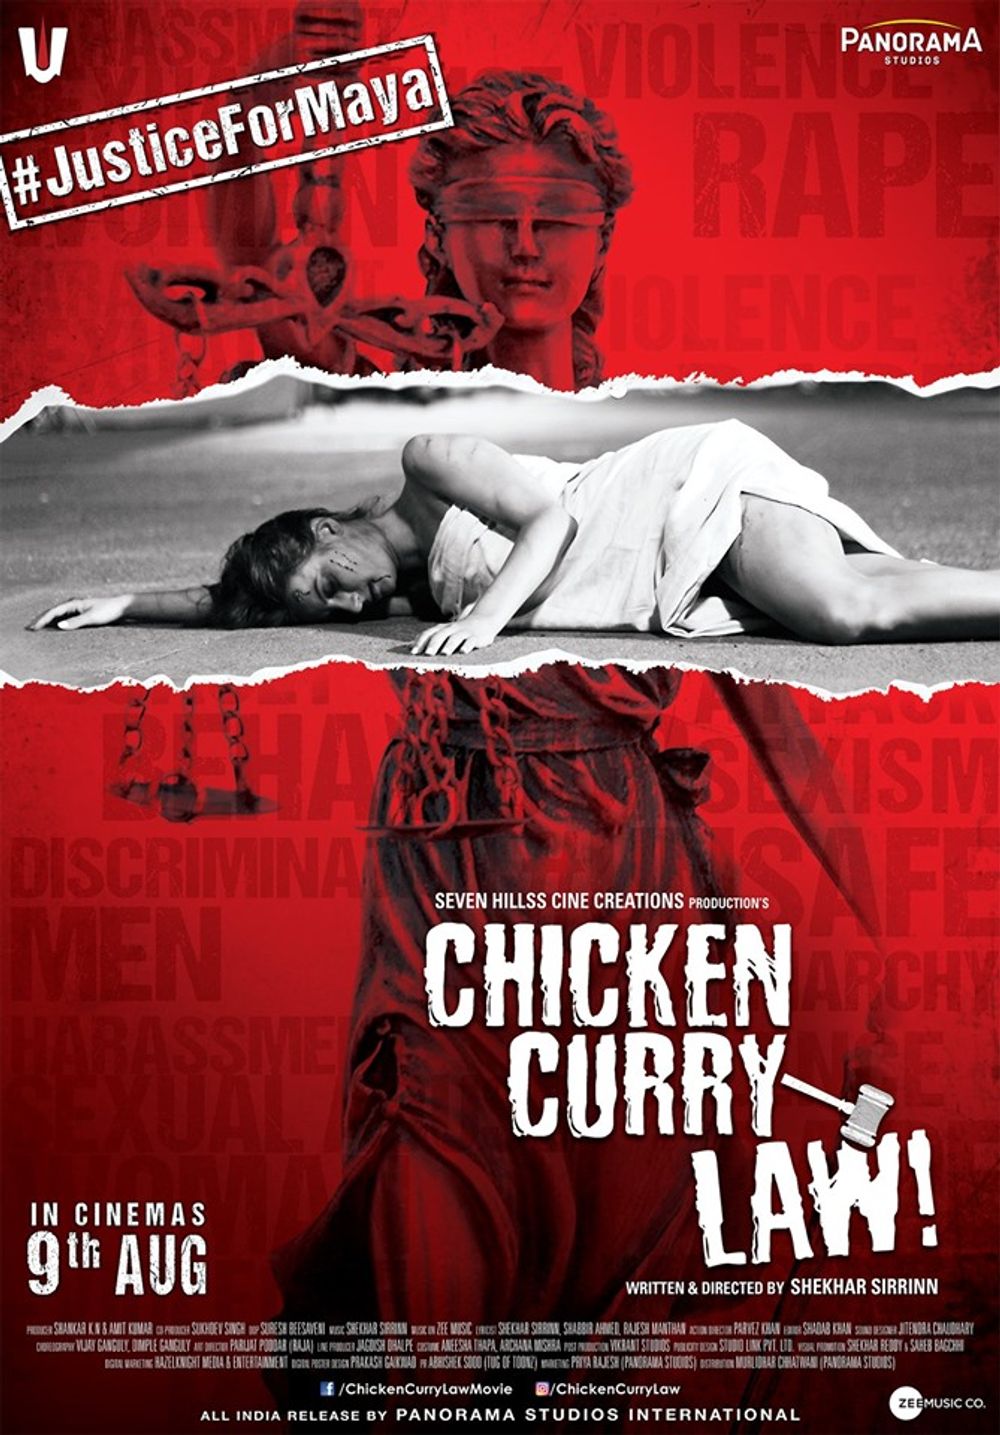 Chicken Curry Law Movie Review